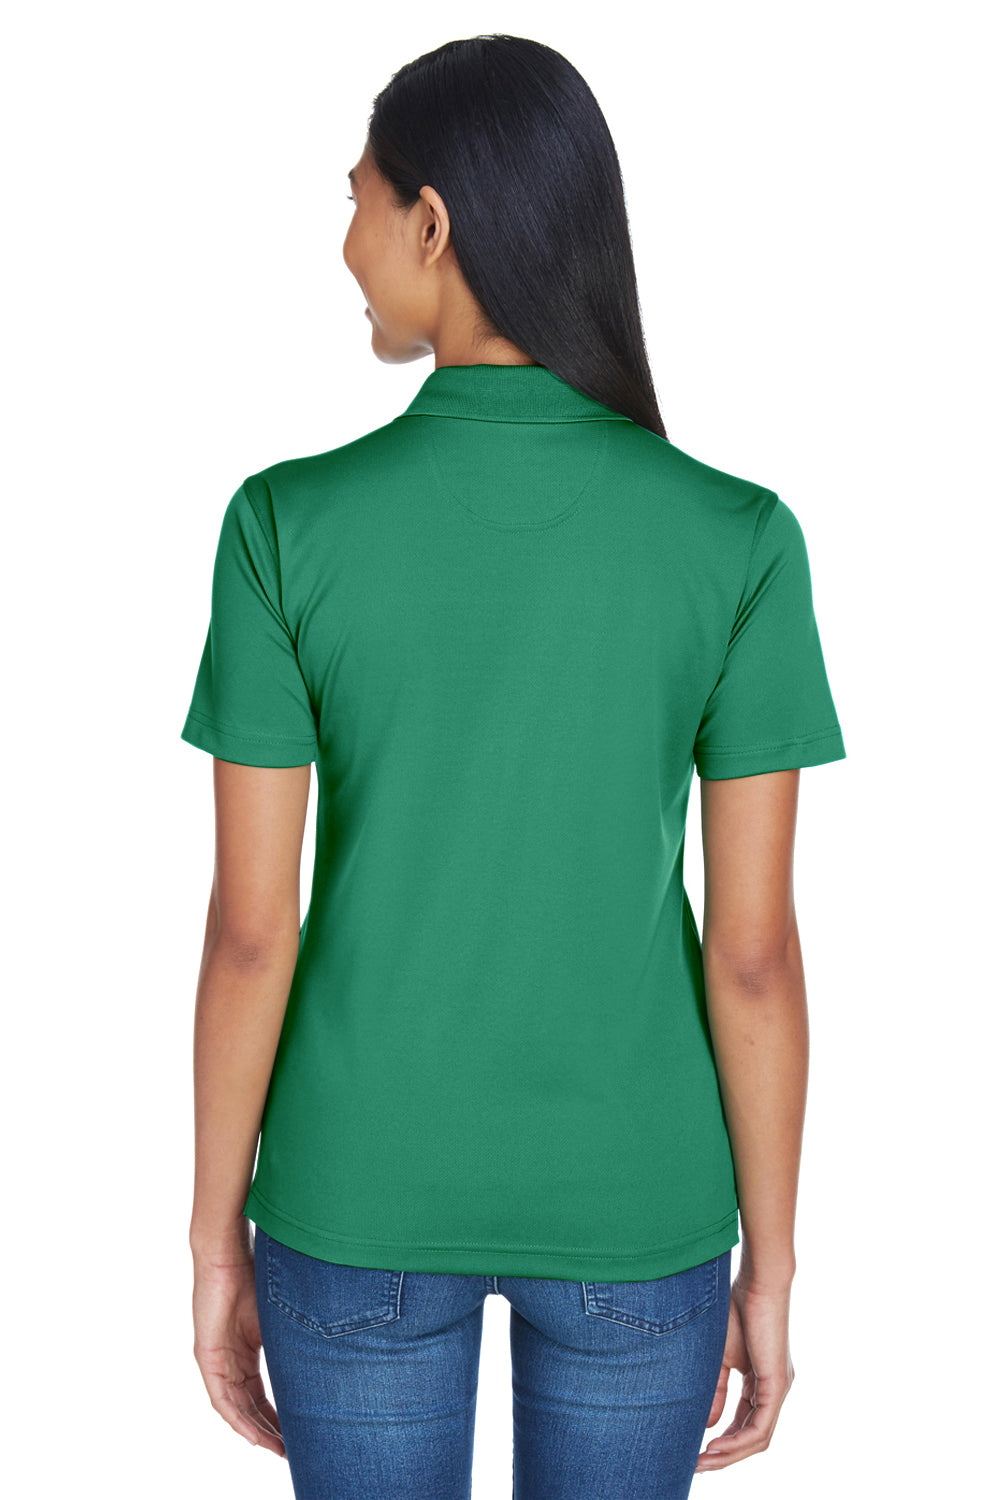 UltraClub 8404 Womens Cool & Dry Moisture Wicking Short Sleeve Polo Shirt Forest Green Back